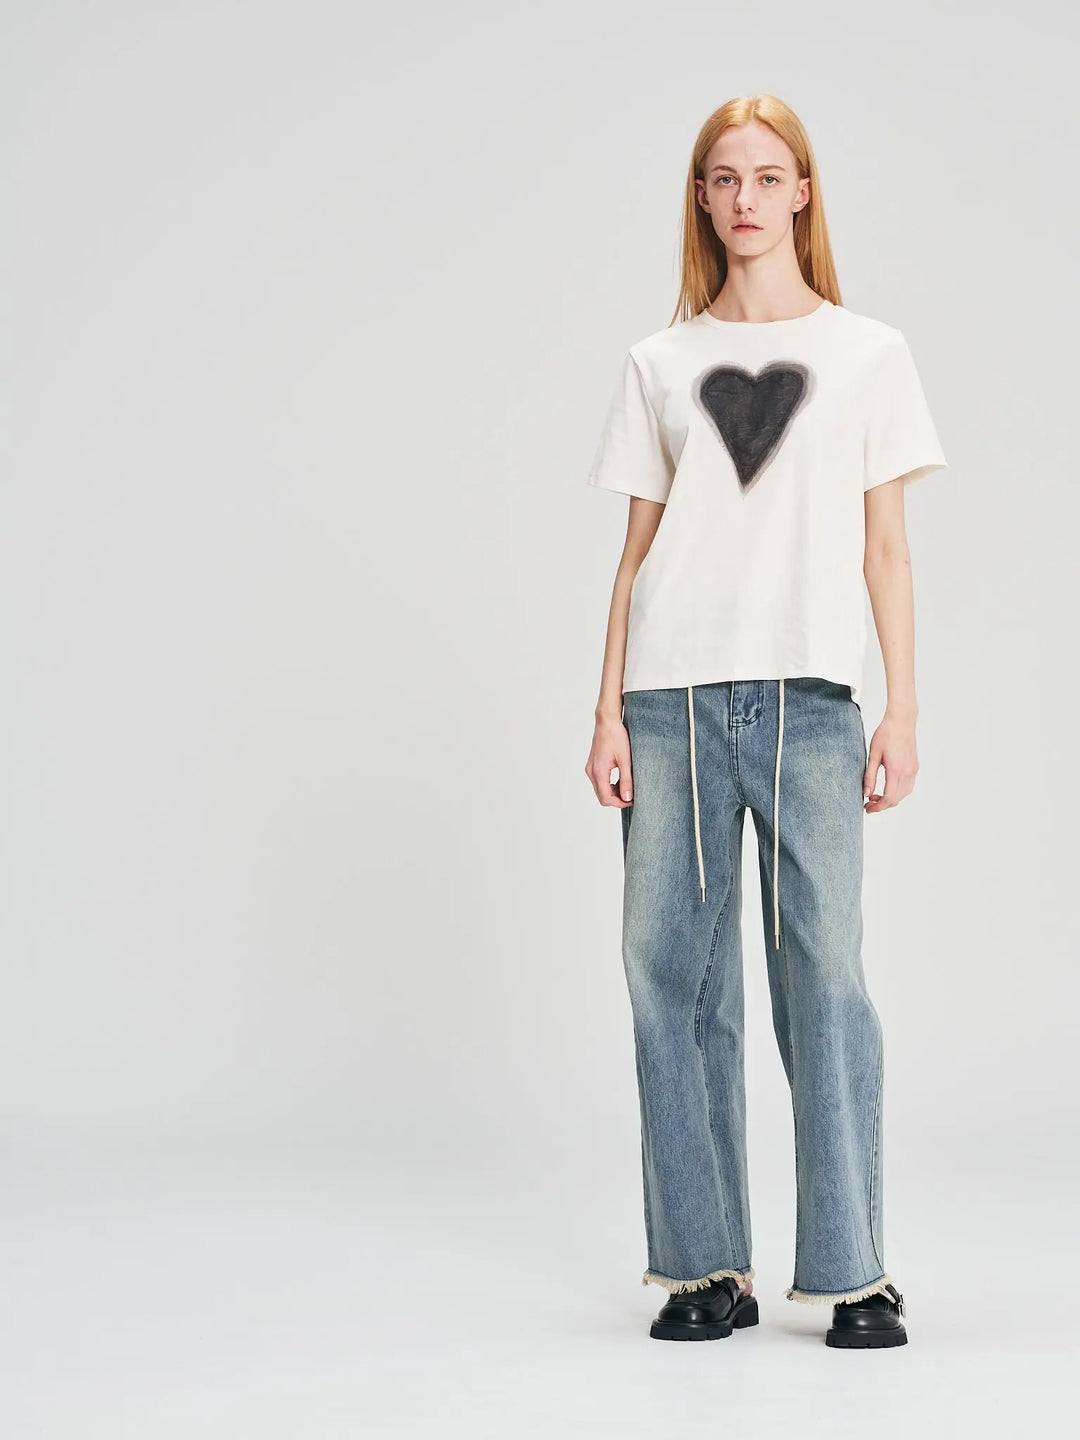 An image of a   25882 Tulle Heart T-Shirt by  Mirra Masa Essential